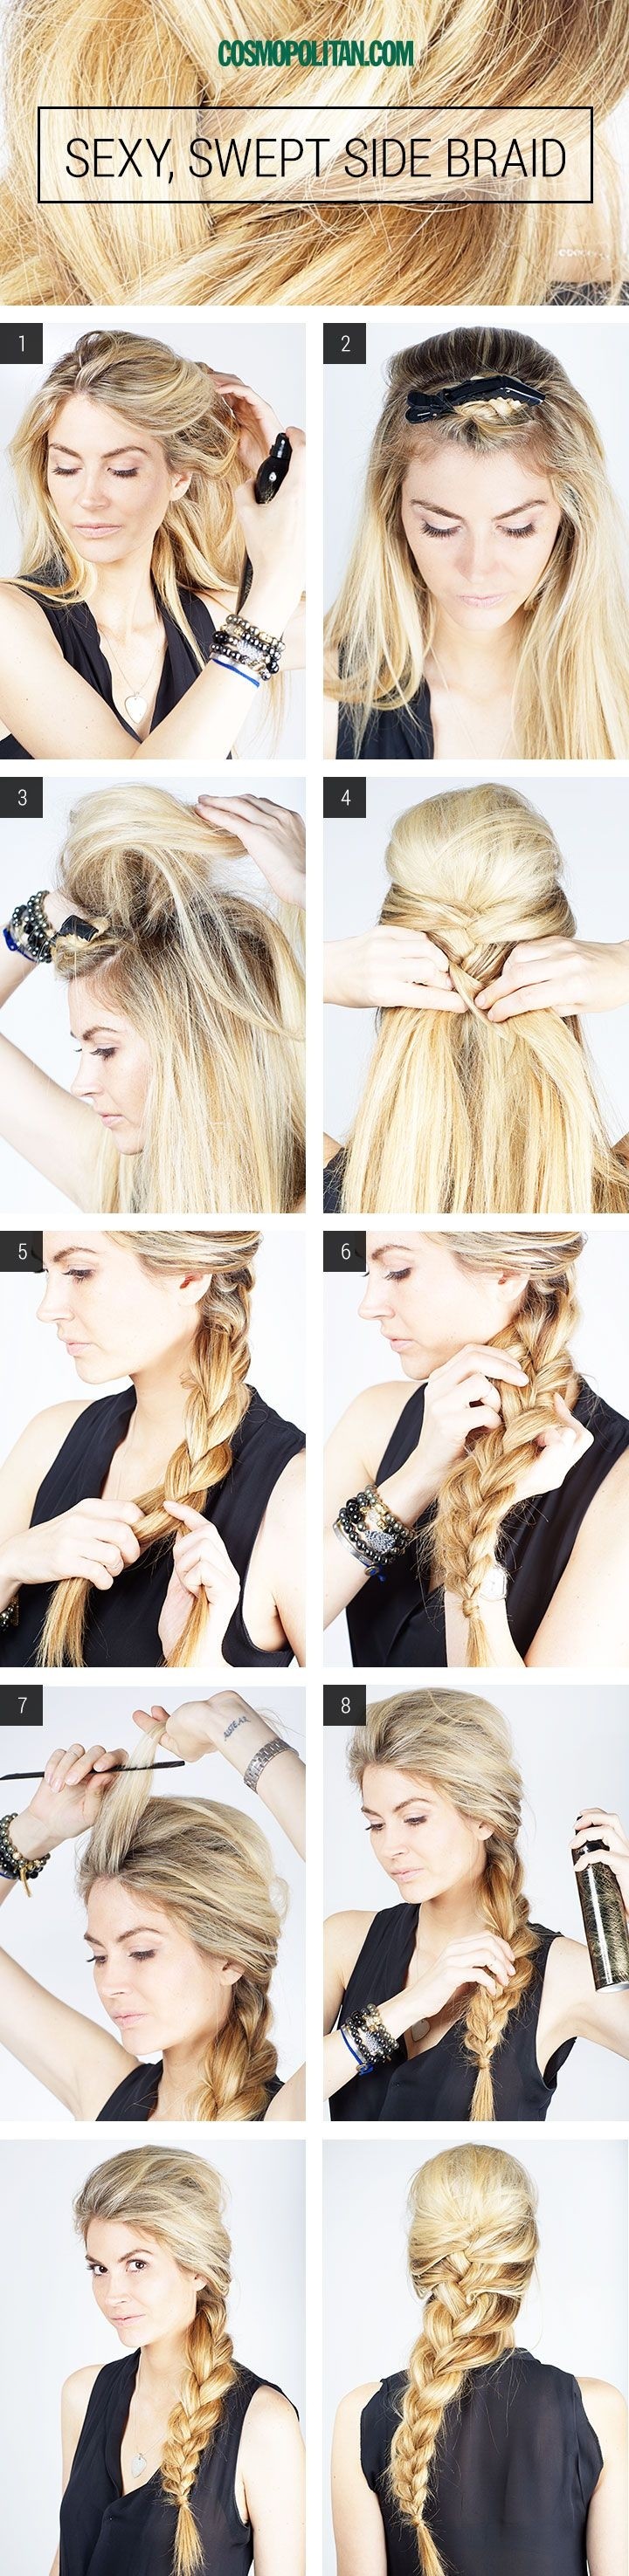 Sexy Swept Side Braided Hairstyle